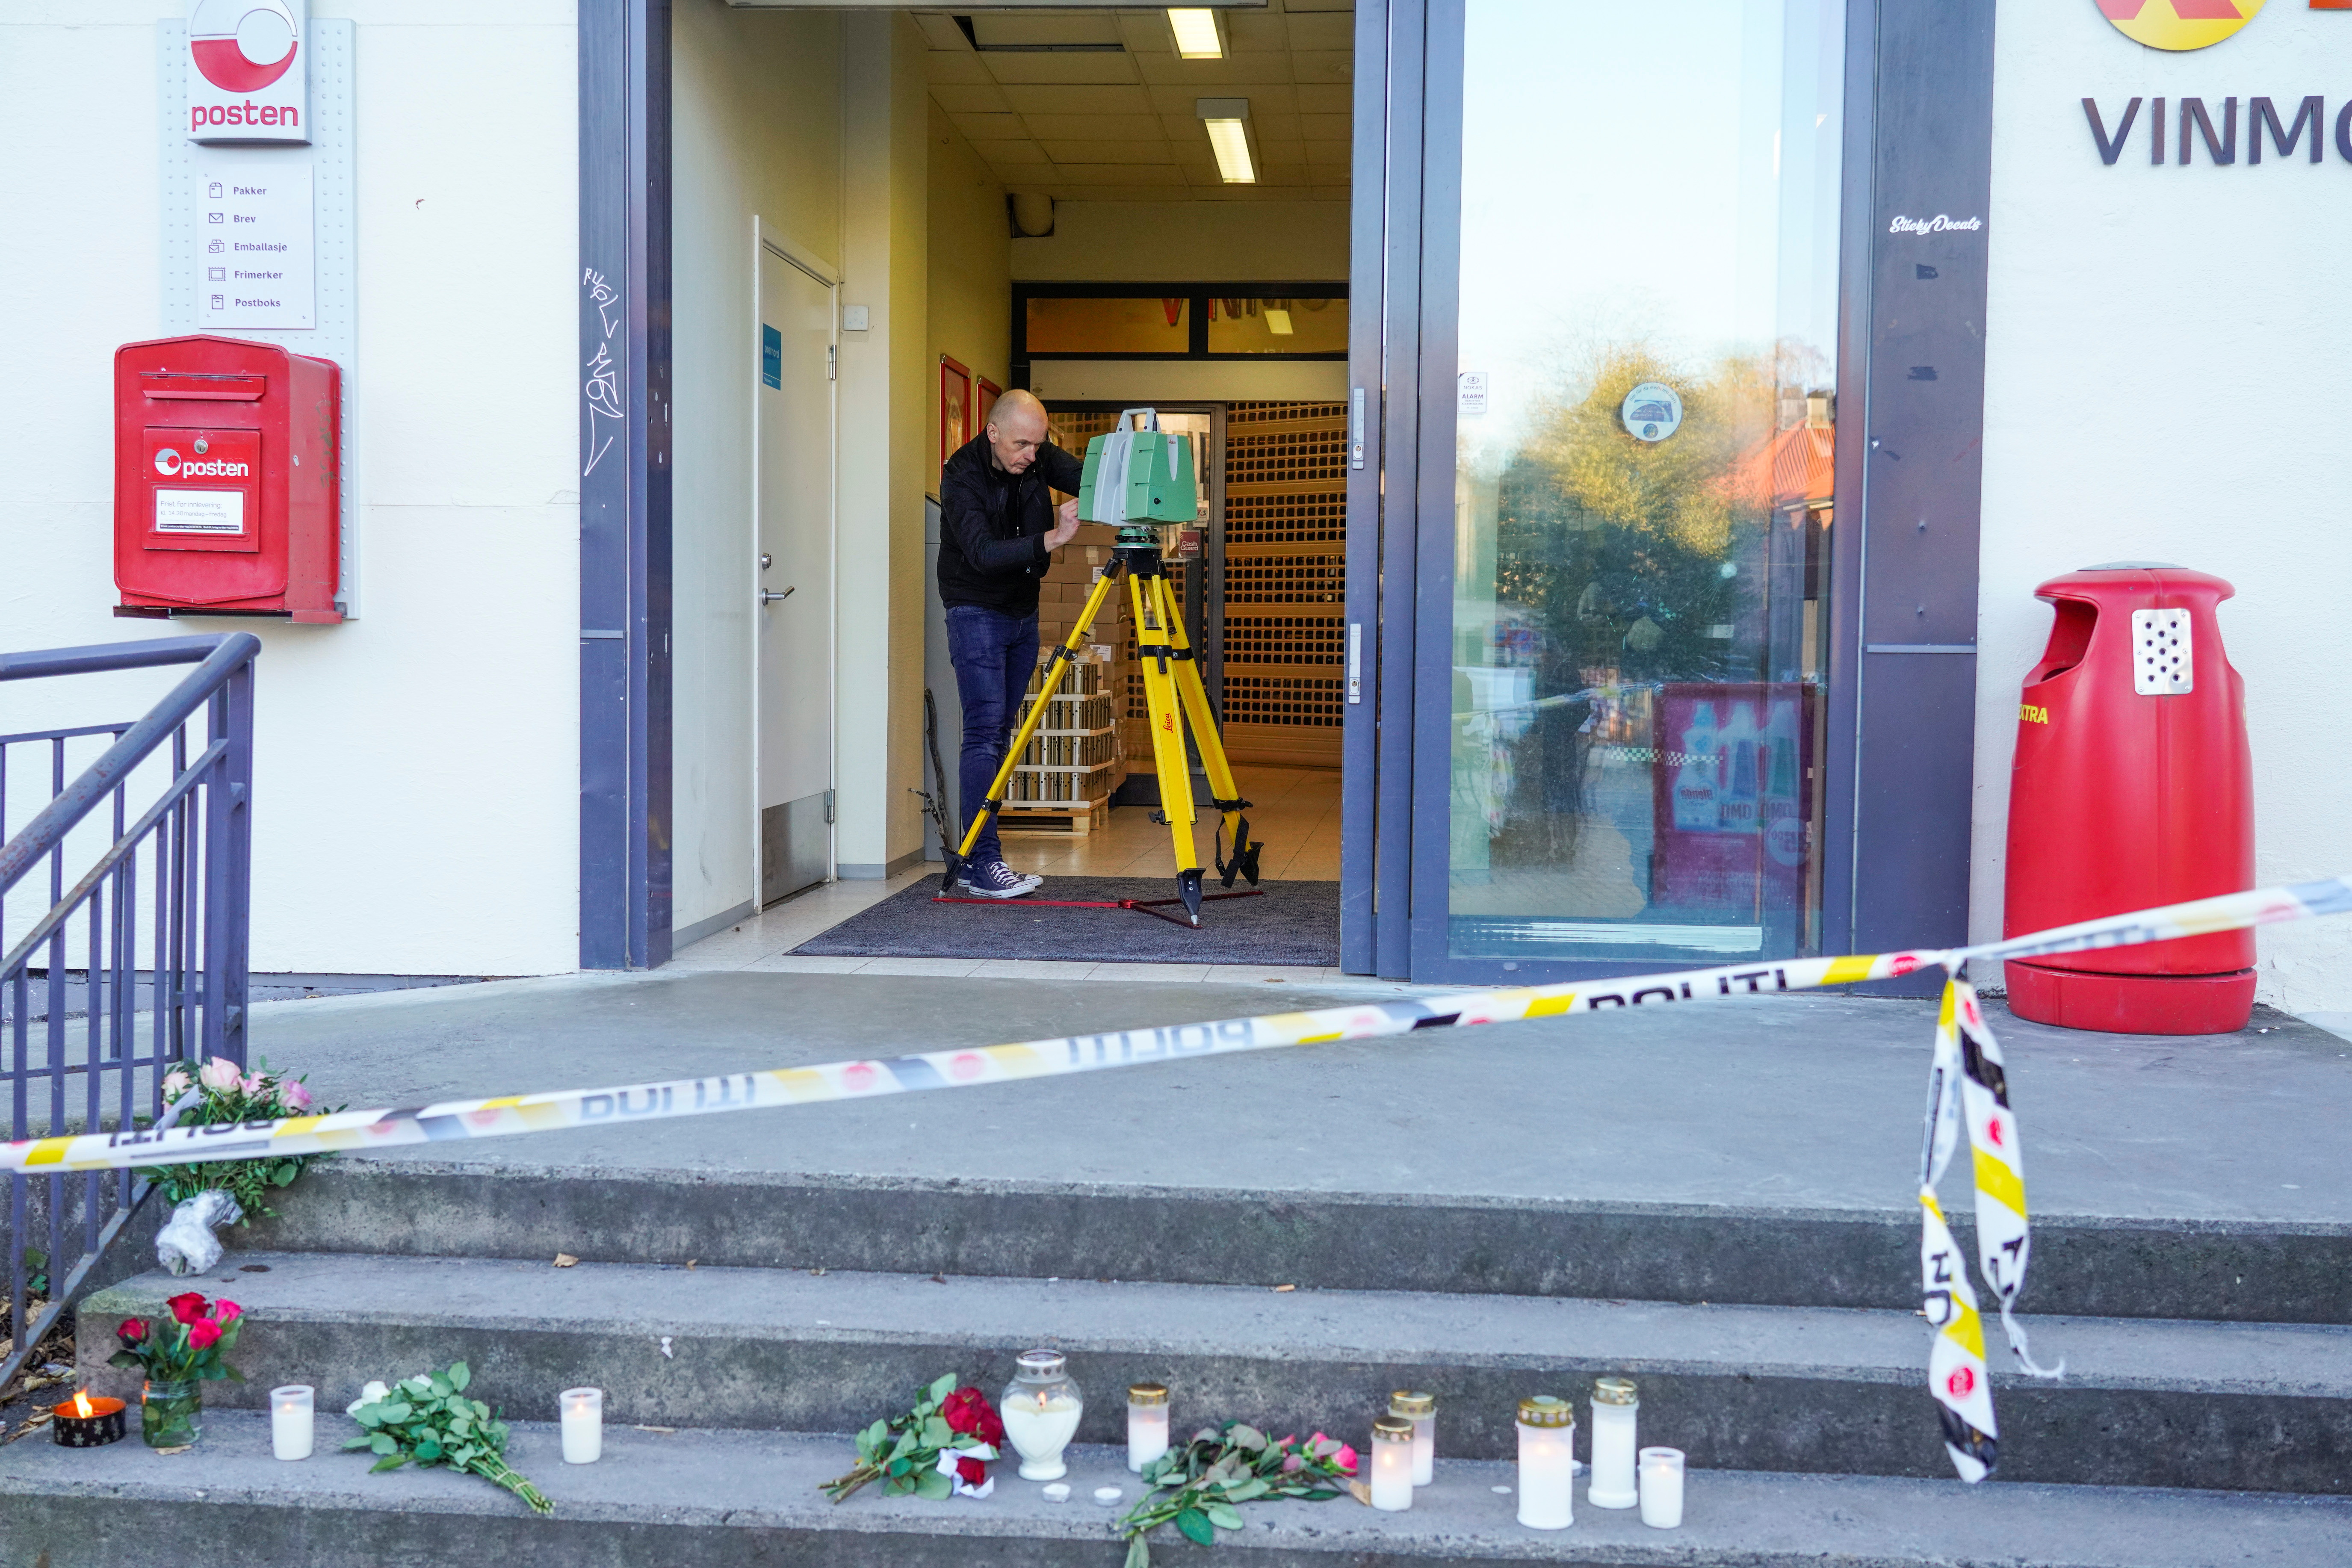 A police officer investigates at the Extra grocery store, where a man killed five people in the city on Wednesday night, in Kongsberg, Norway October 15, 2021. Terje Bendiksby/NTB/via REUTERS 